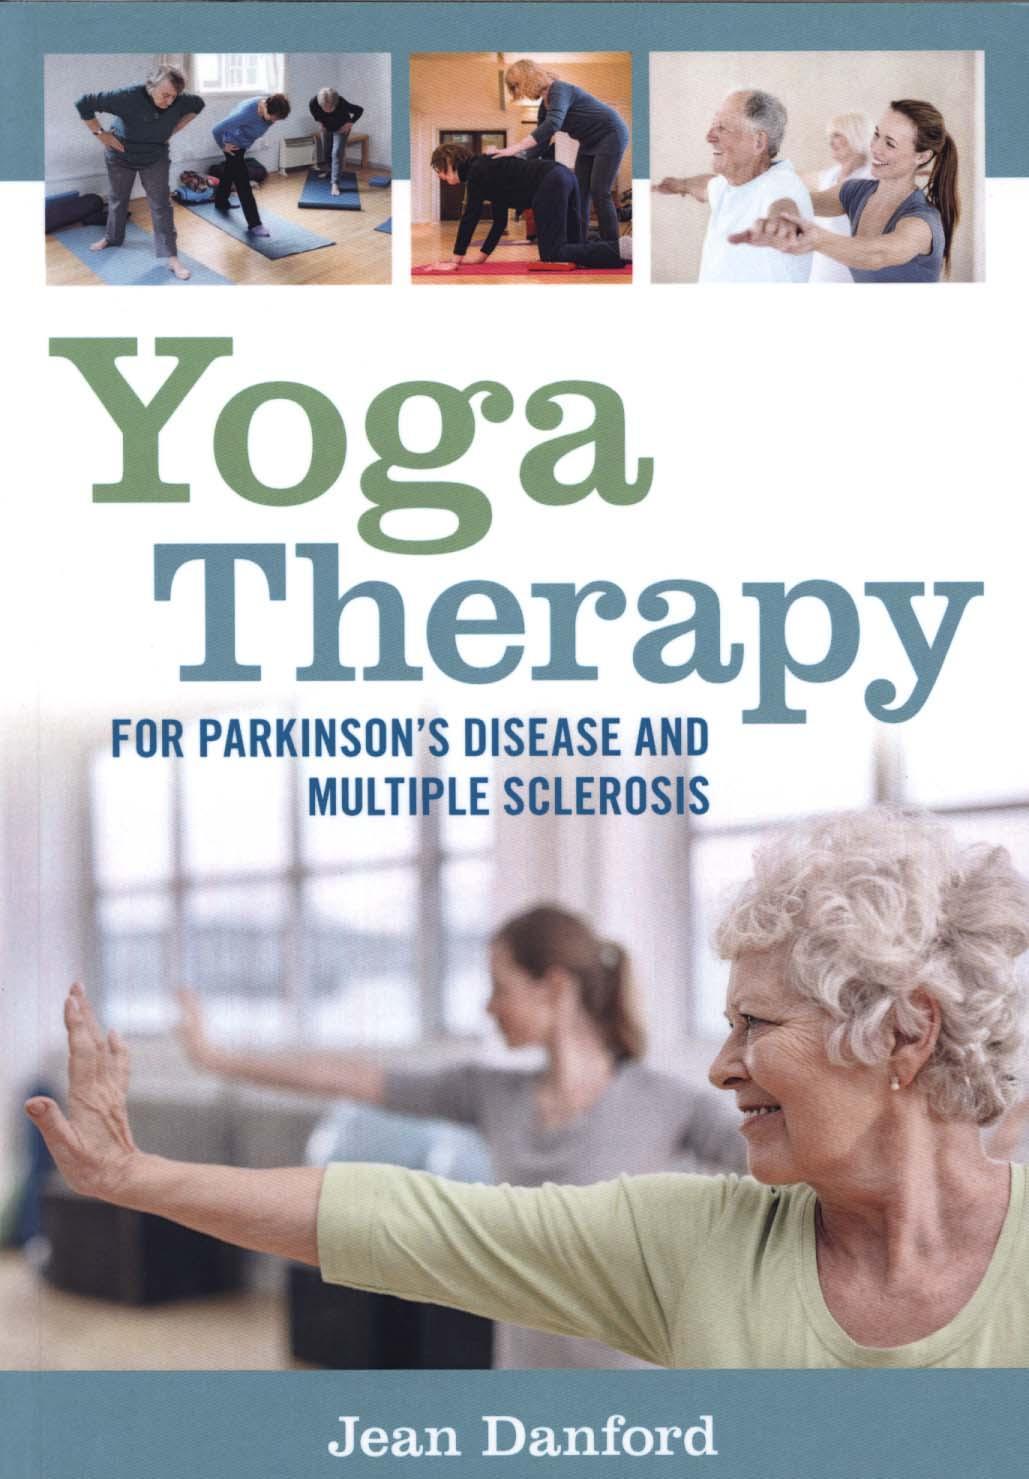 Yoga Therapy for Parkinson's Disease and Multiple Sclerosis